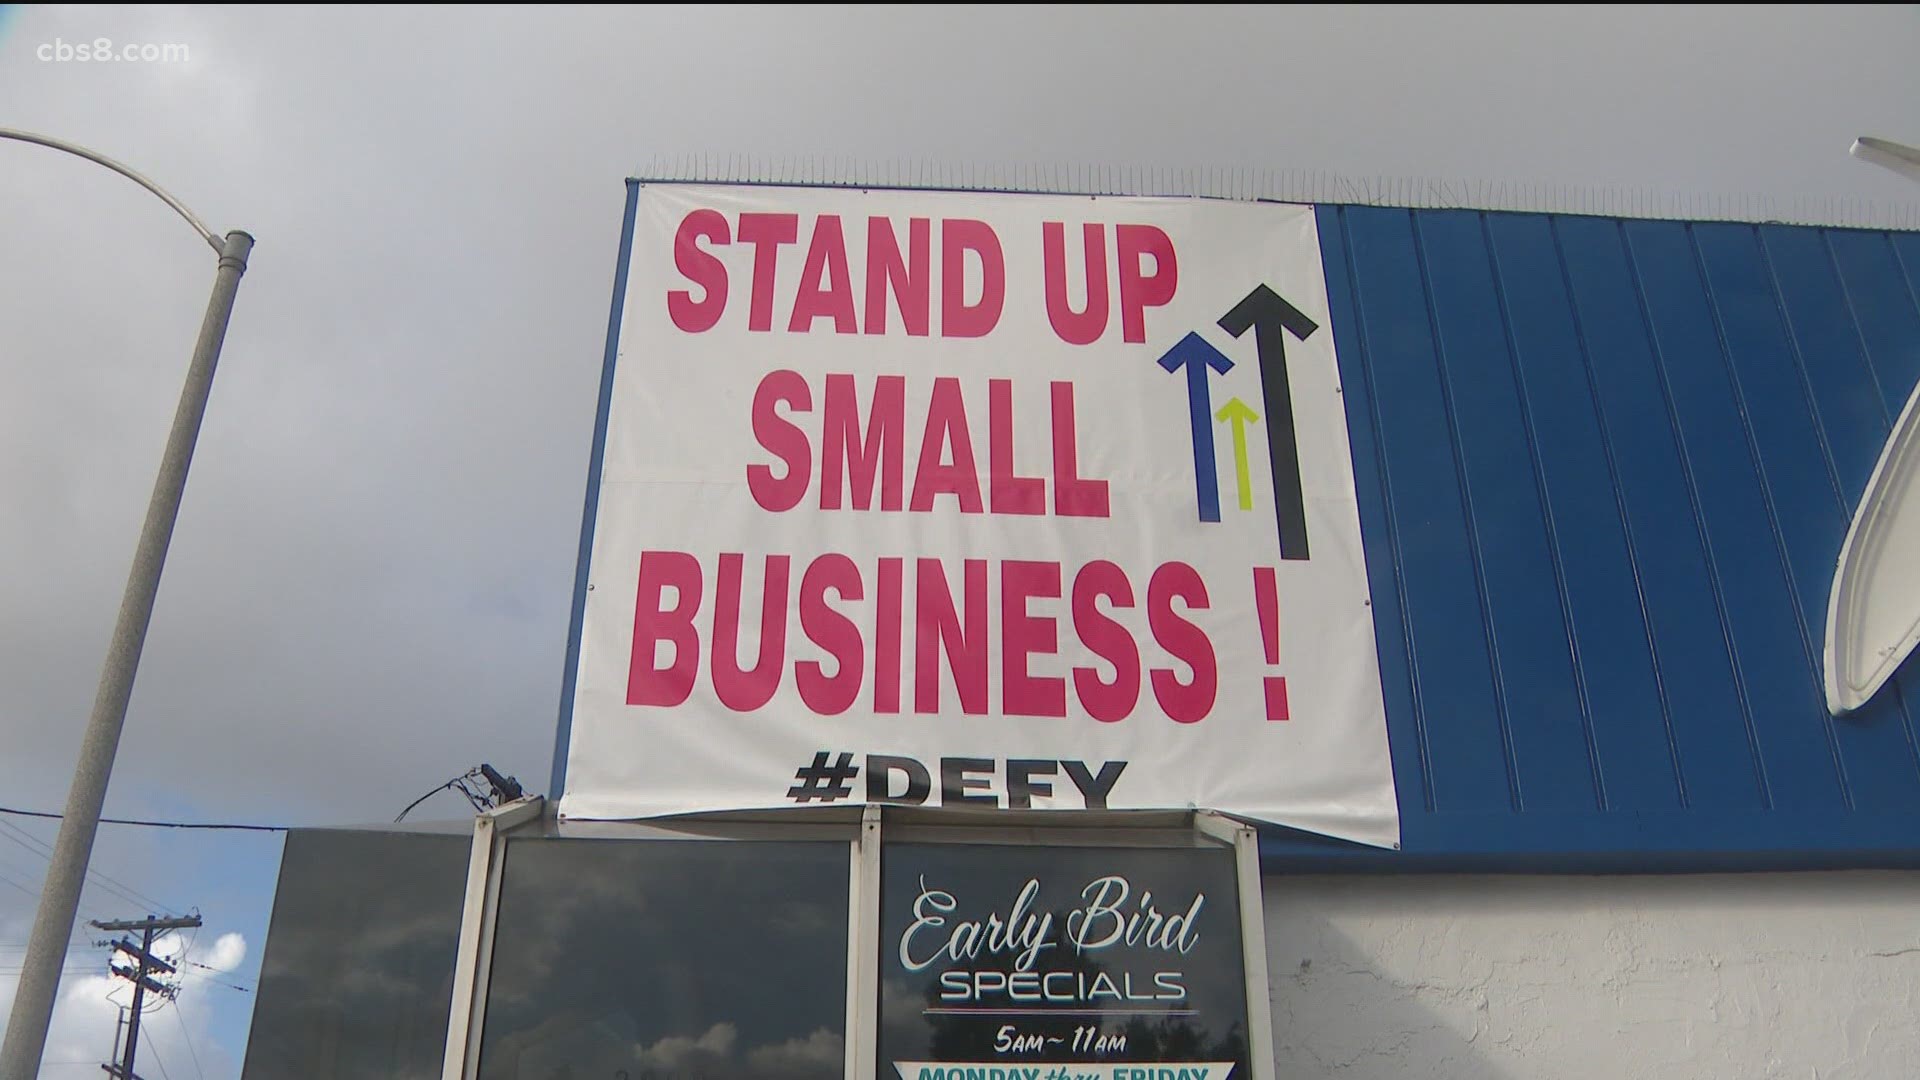 Some businesses are planning on possibly defying the health order once the weekend is here.